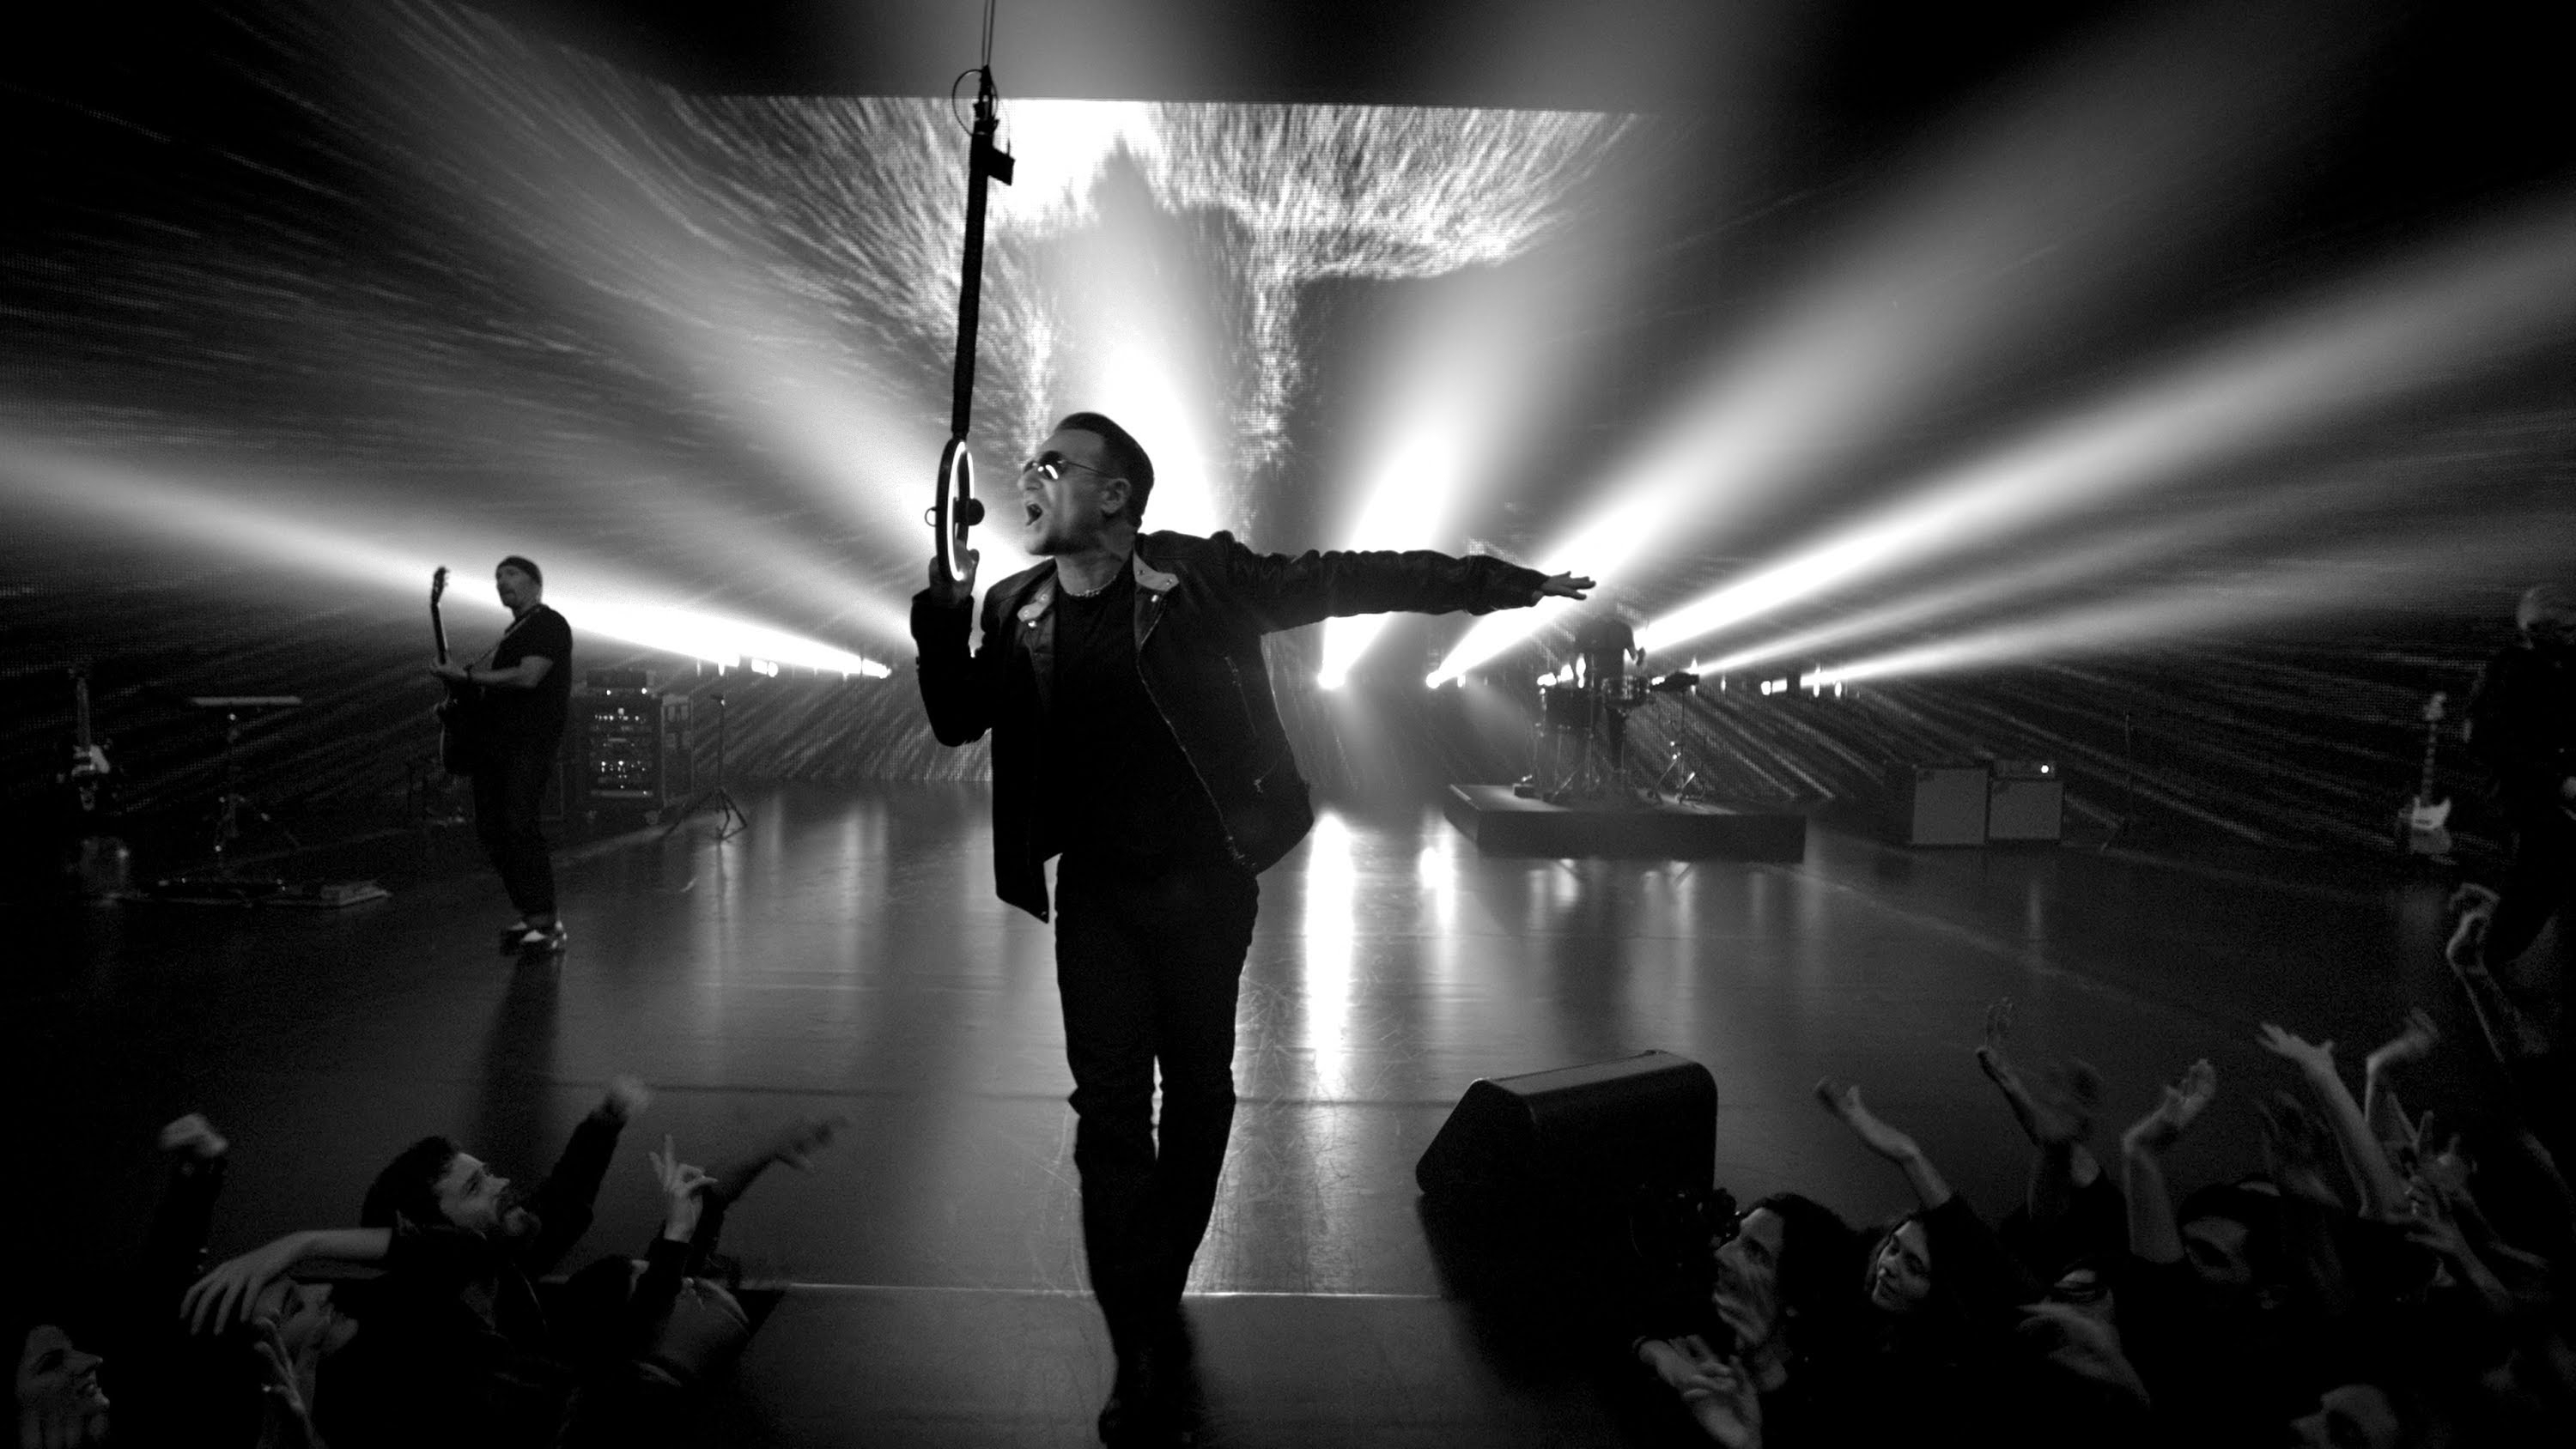 u2 wallpaper hd,performance,light,stage,black and white,performing arts